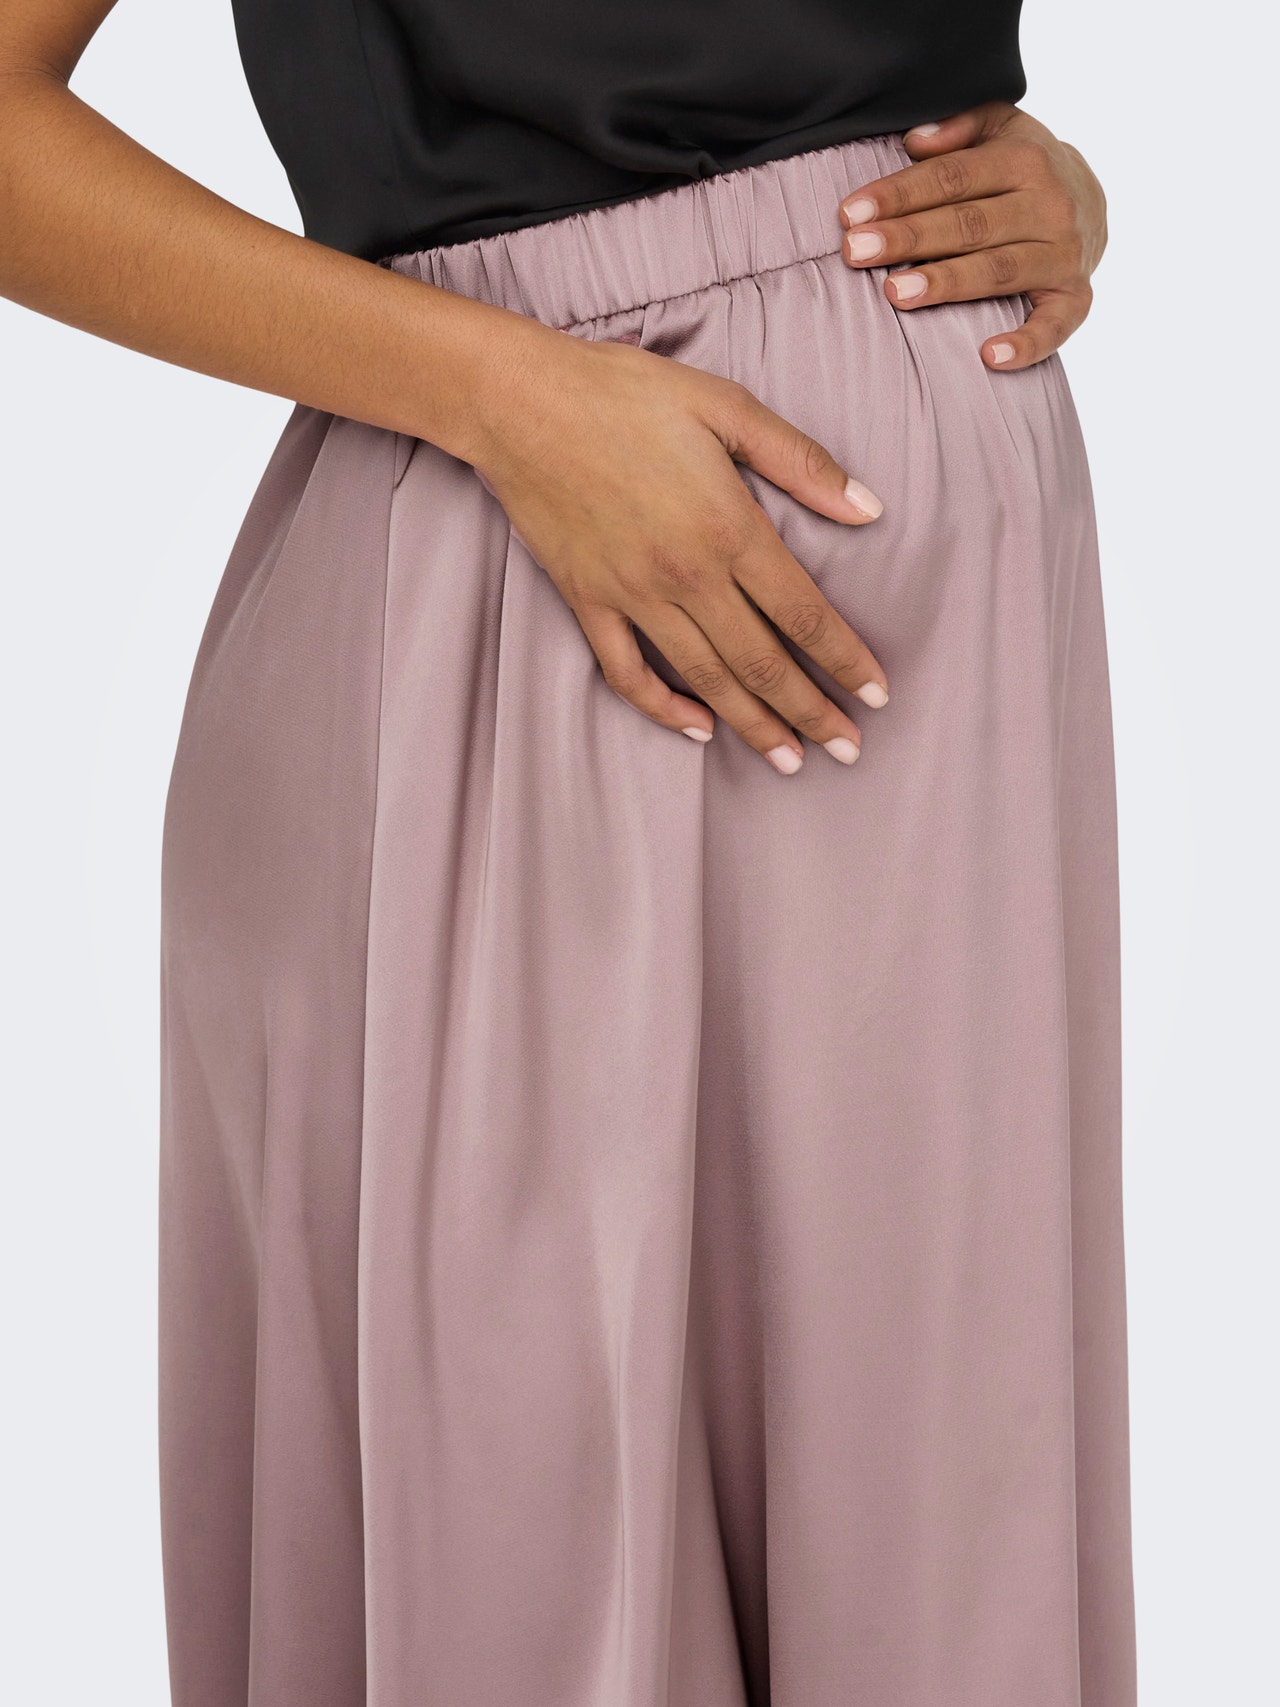 Mittlere Taille Maternity Langer Rock | Hellrosa | ONLY®